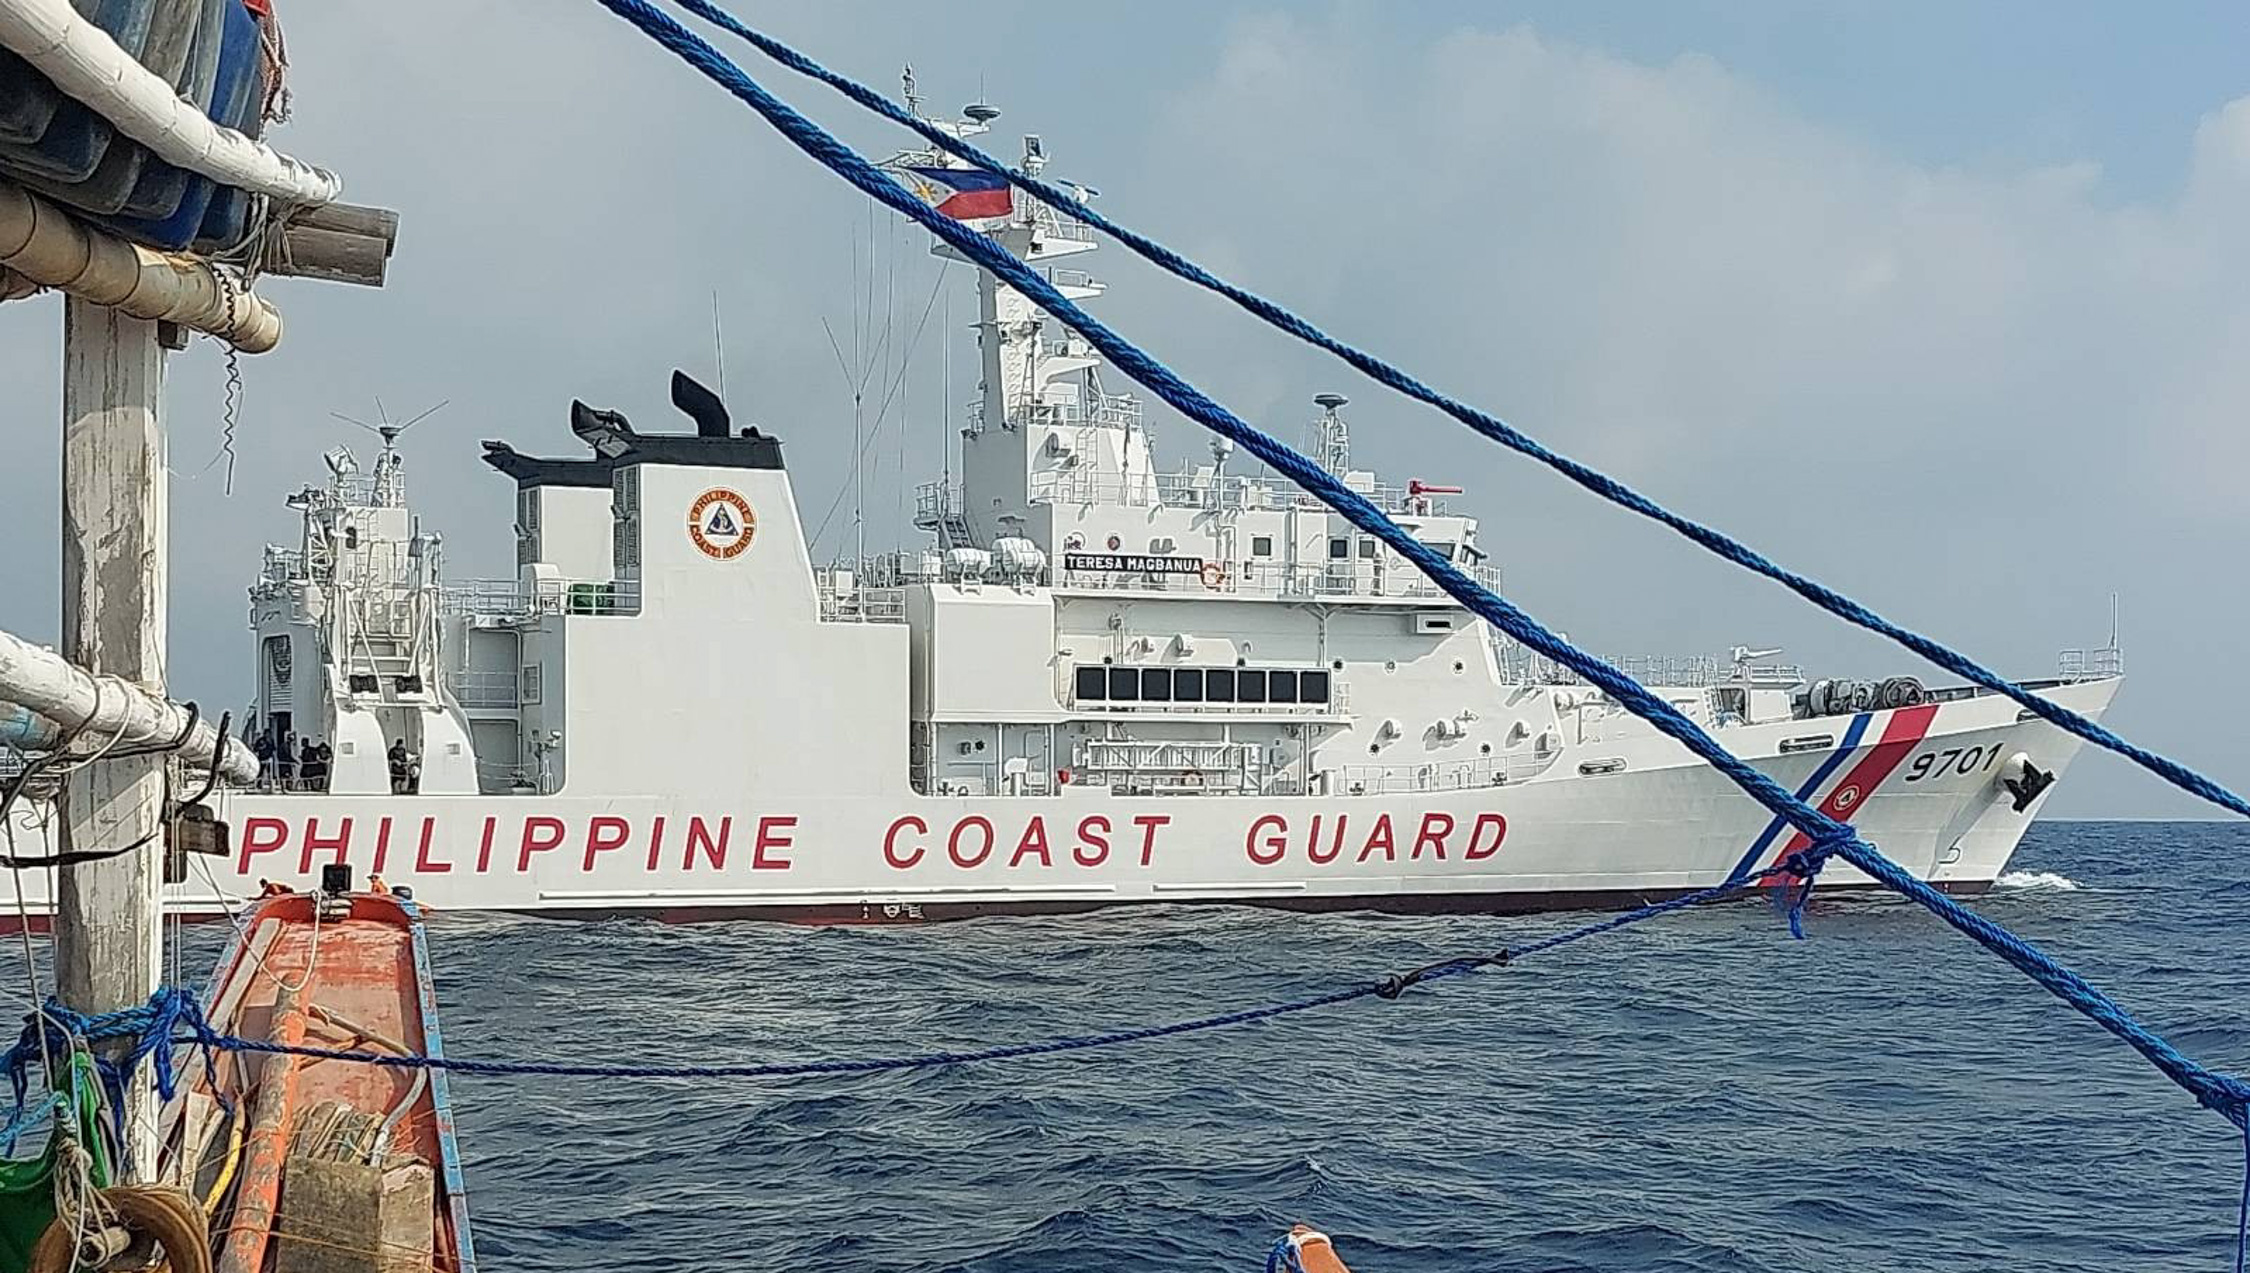 Following the directive of PresidentMarcos to strengthen and increase the Philippine Coast Guard’s (PCG) presence and operations in the West Philippine Sea, PCG Commandant, Admiral Artemio Abu, has deployed the PCG Fleet’s largest vessel, the BRP Teresa Magbanua, to the Kalayaan Island Group